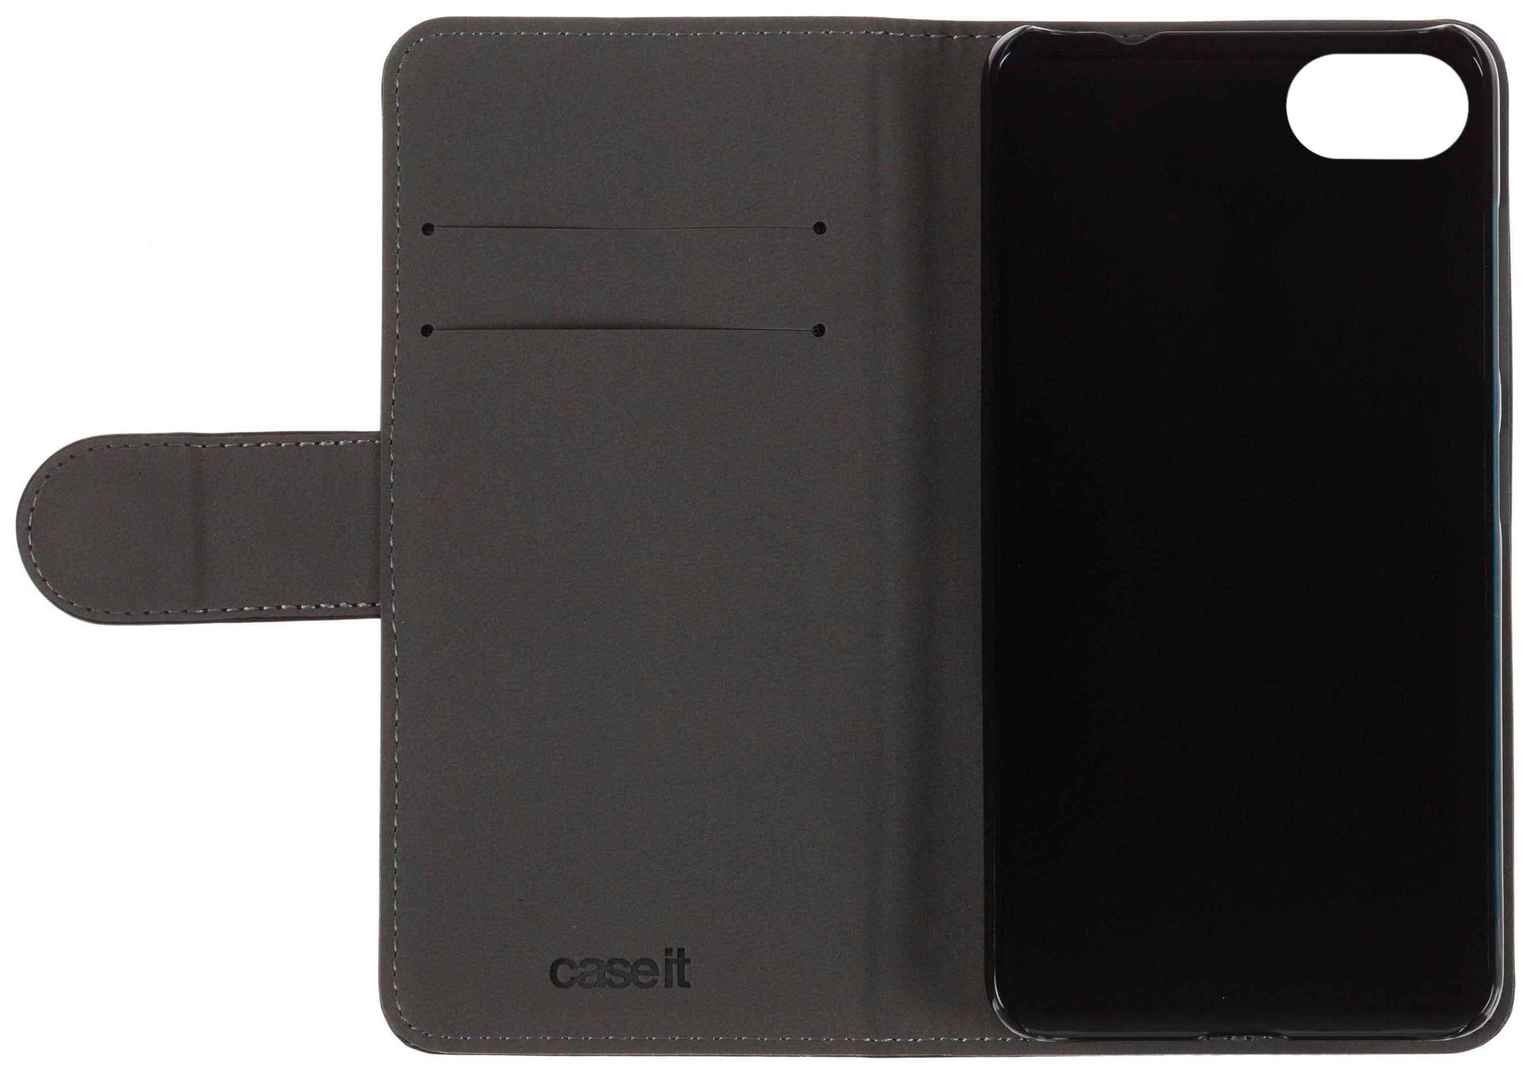 Case It iPhone 8/7/6 Folio Case with Screen Protector